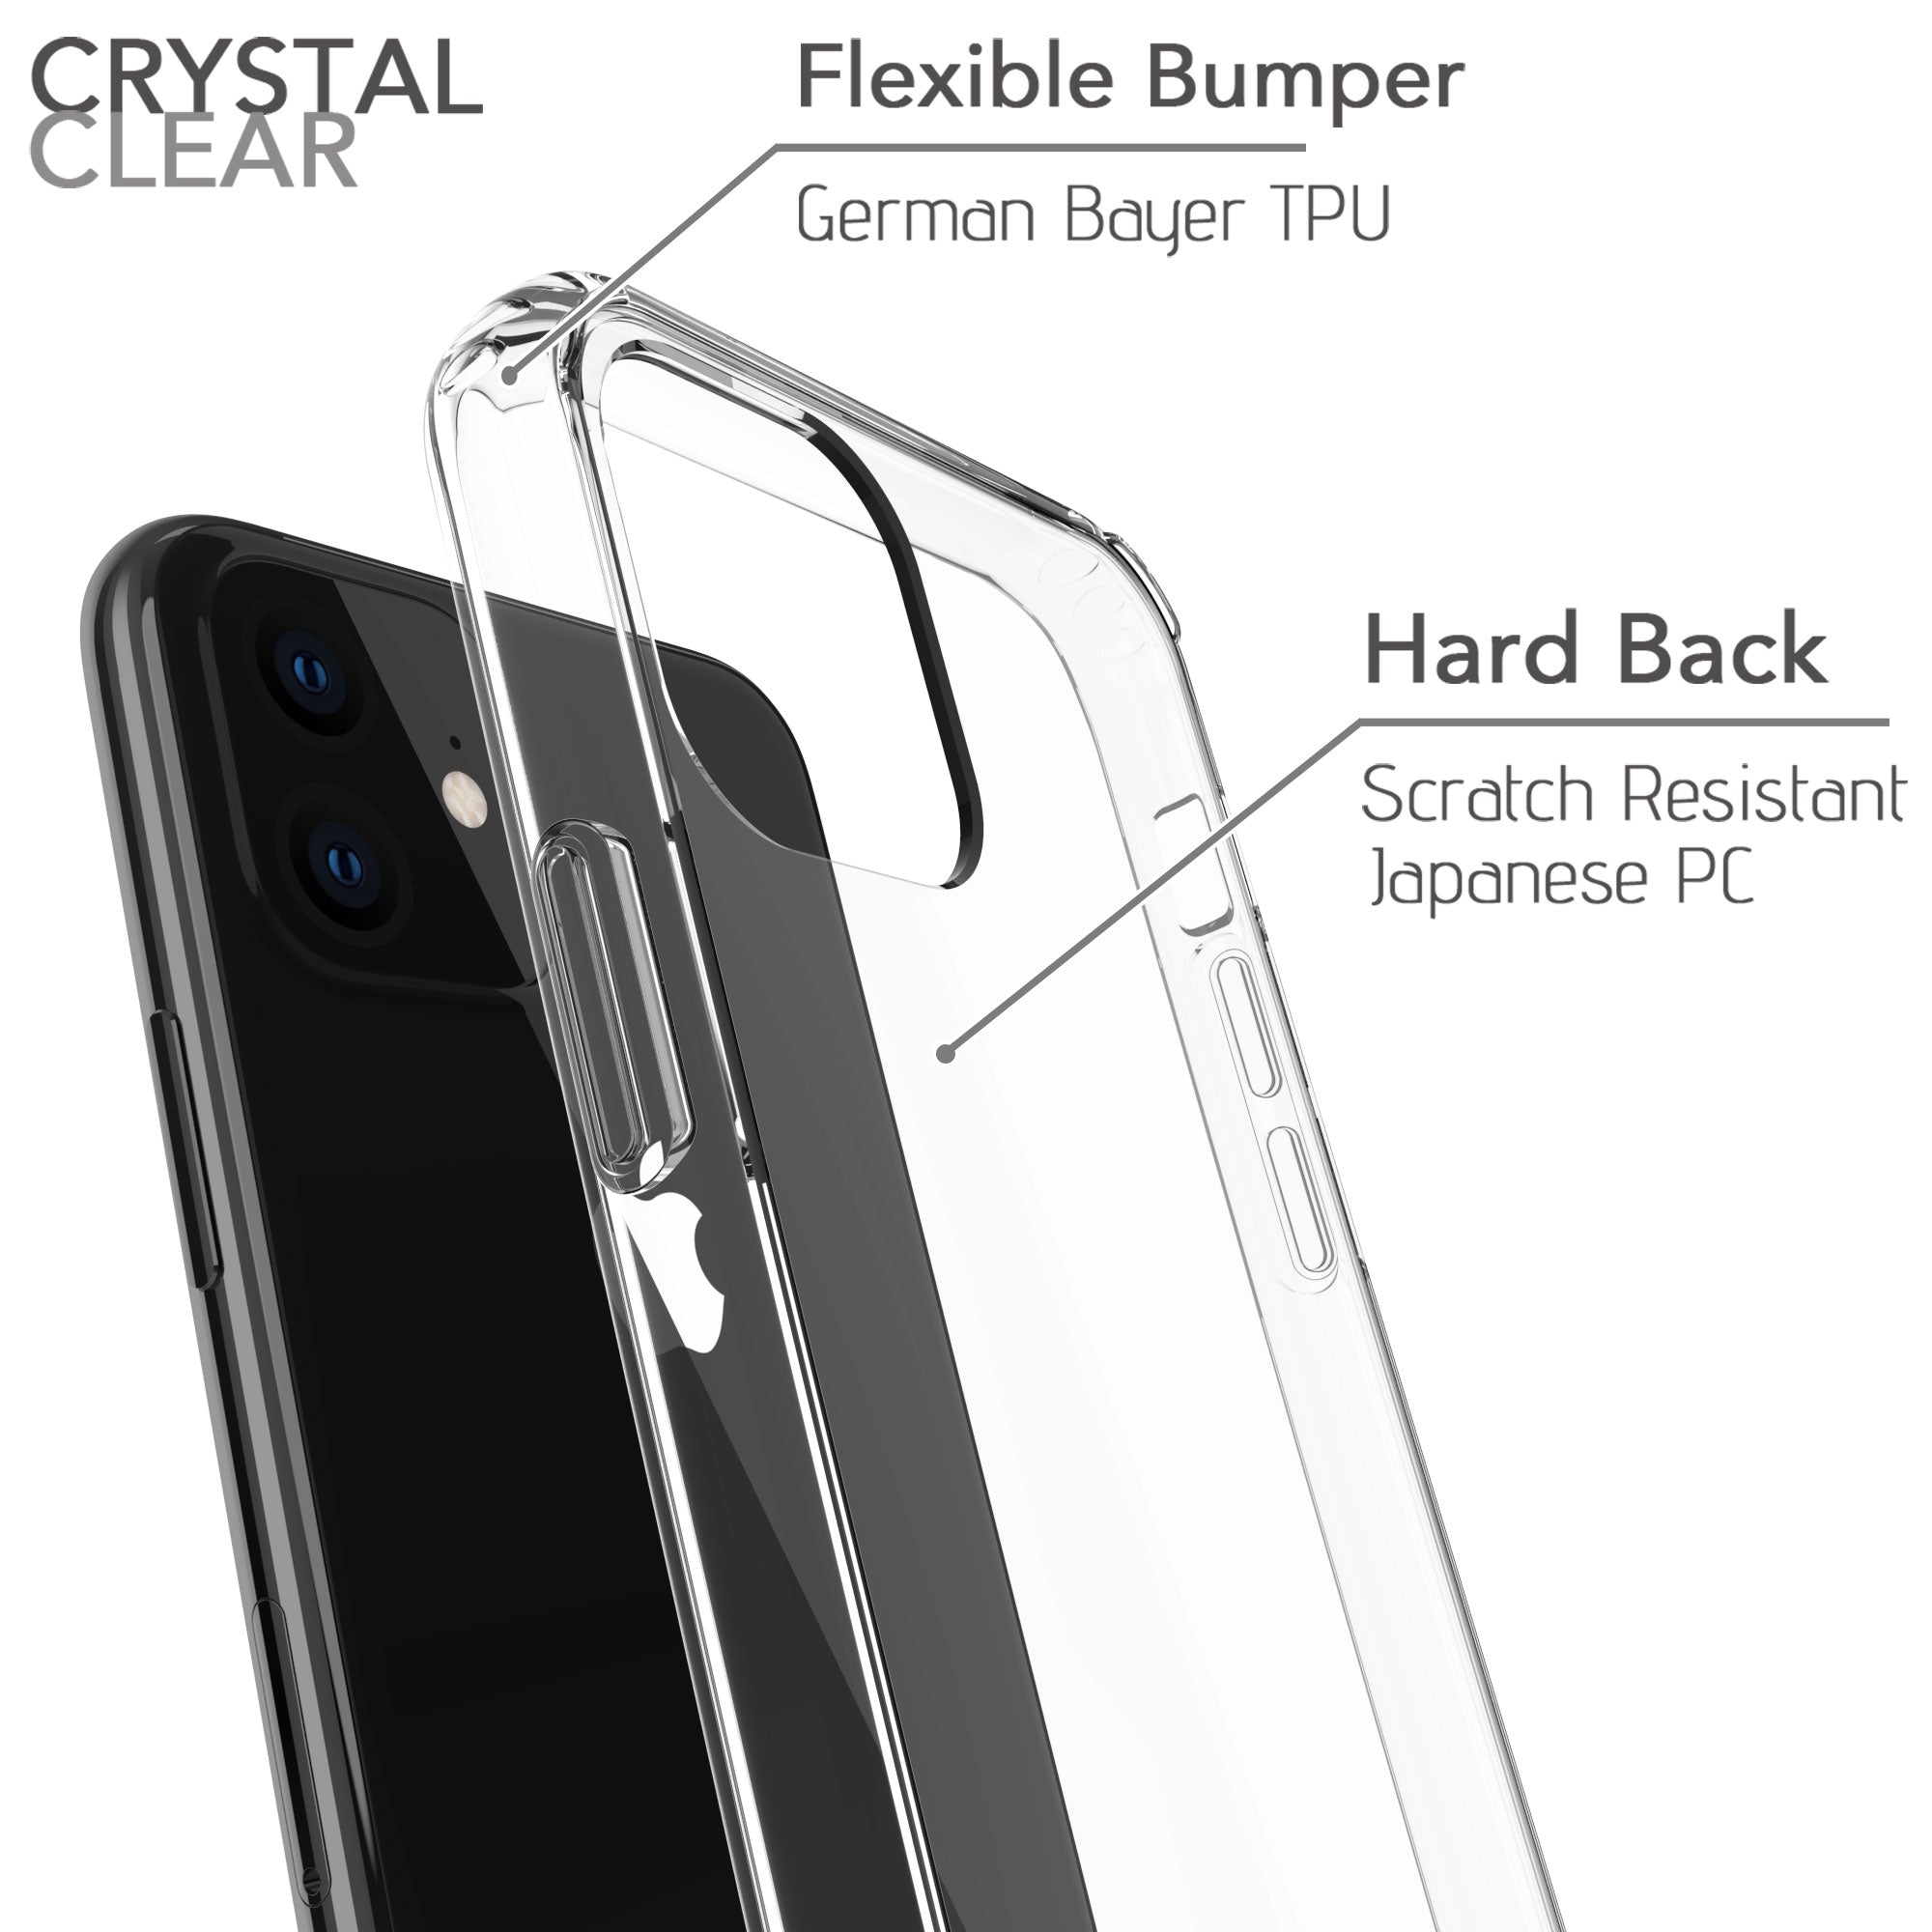 Luvvitt Clear View Case and Tempered Glass Screen Protector Bundle for iPhone 11 Pro Max 2019